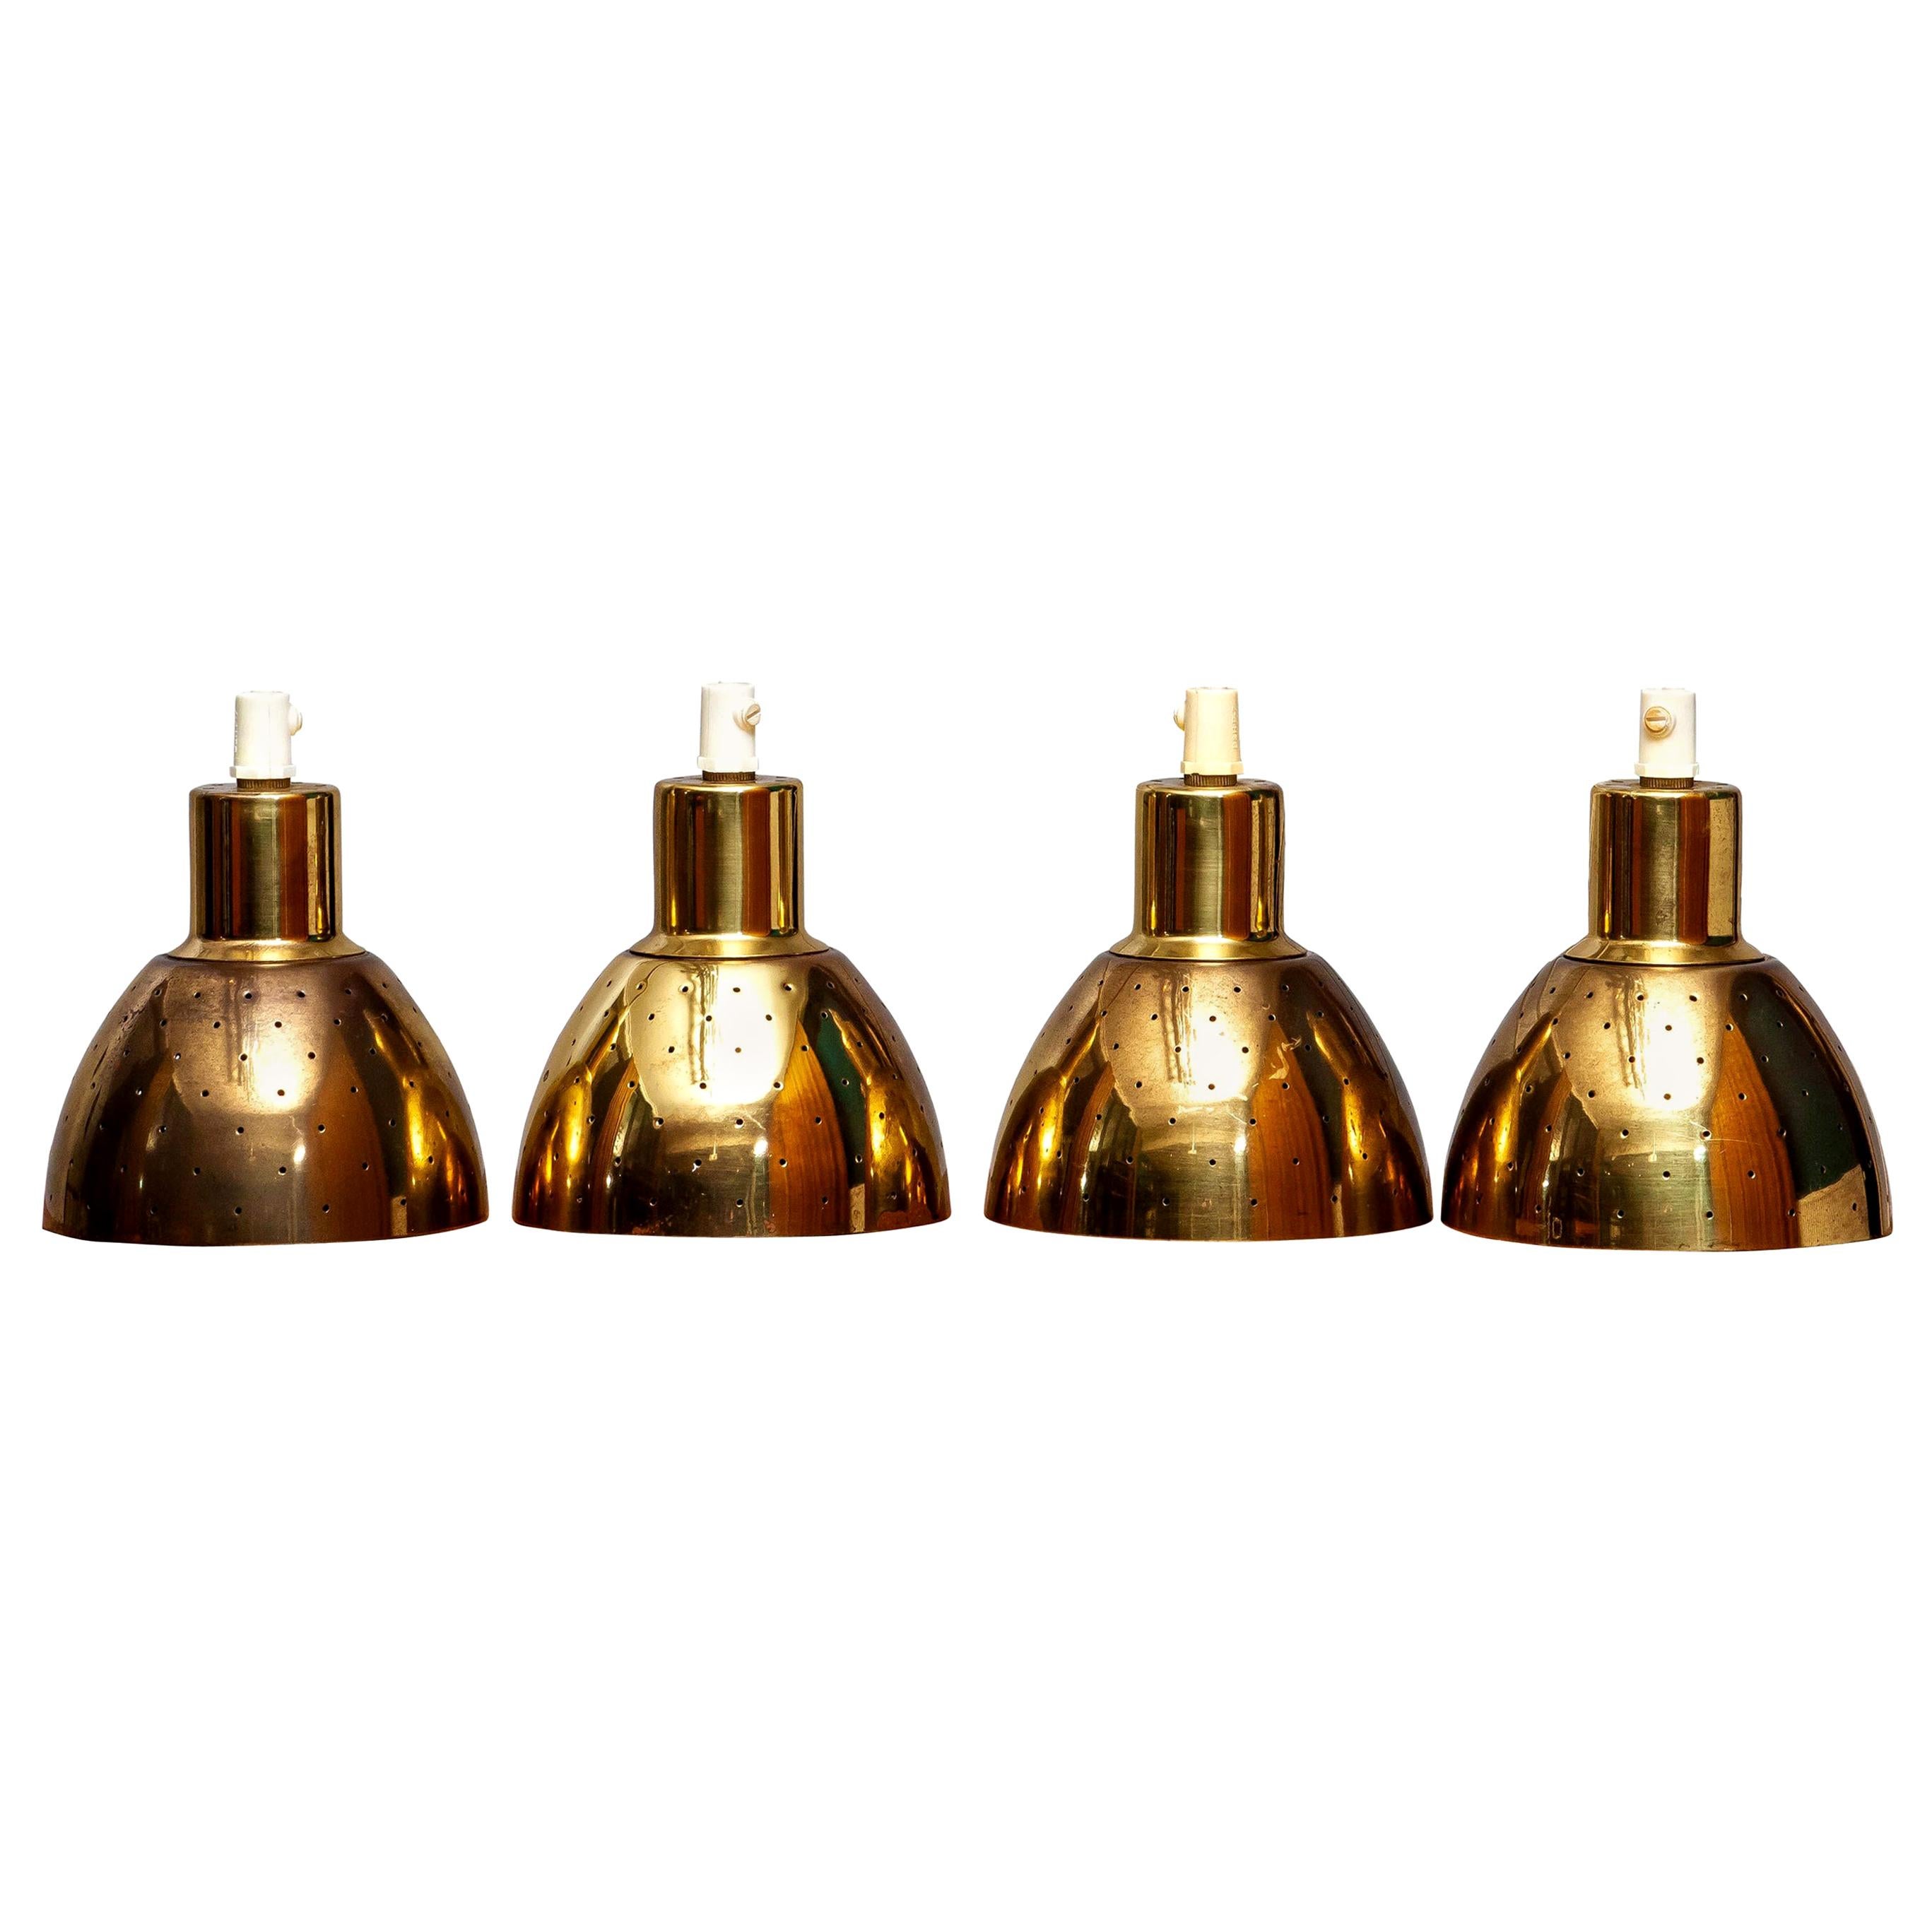 Great set of four brass pendants by Hans-Agne Jakobsson for Markaryd, Sweden.
Each lamp has perforation with gives the light a beautiful shining.
They are in a good and working condition.
Period: 1960s.
Dimensions: H 11 cm, Ø 11 cm.